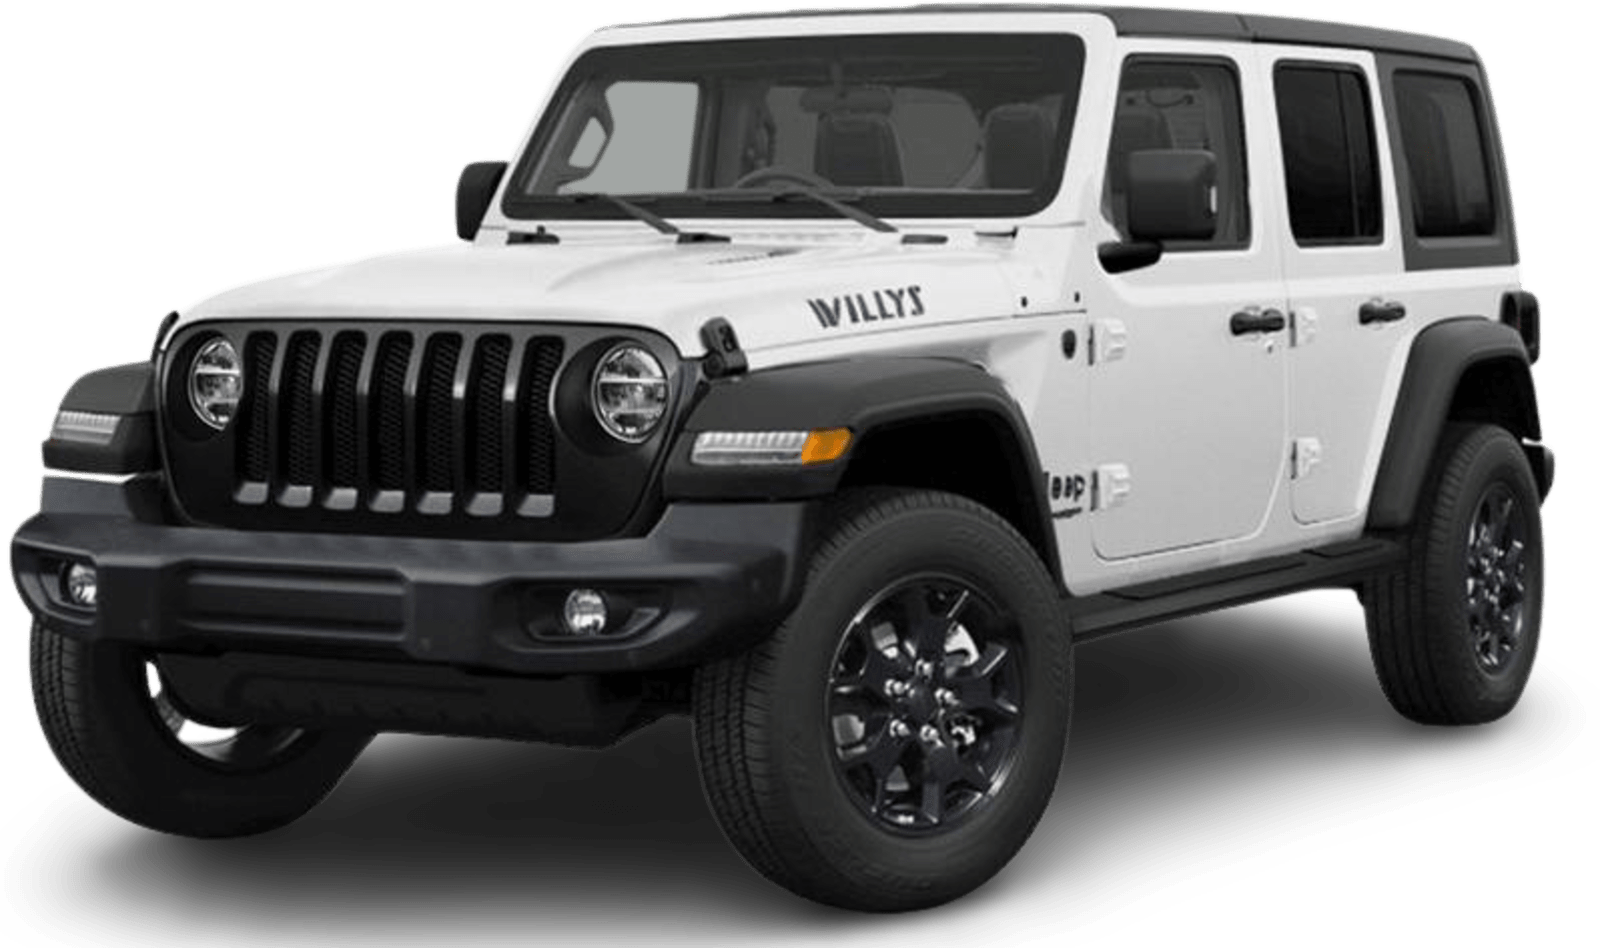 Jeep Wrangler Unlimited cutout image